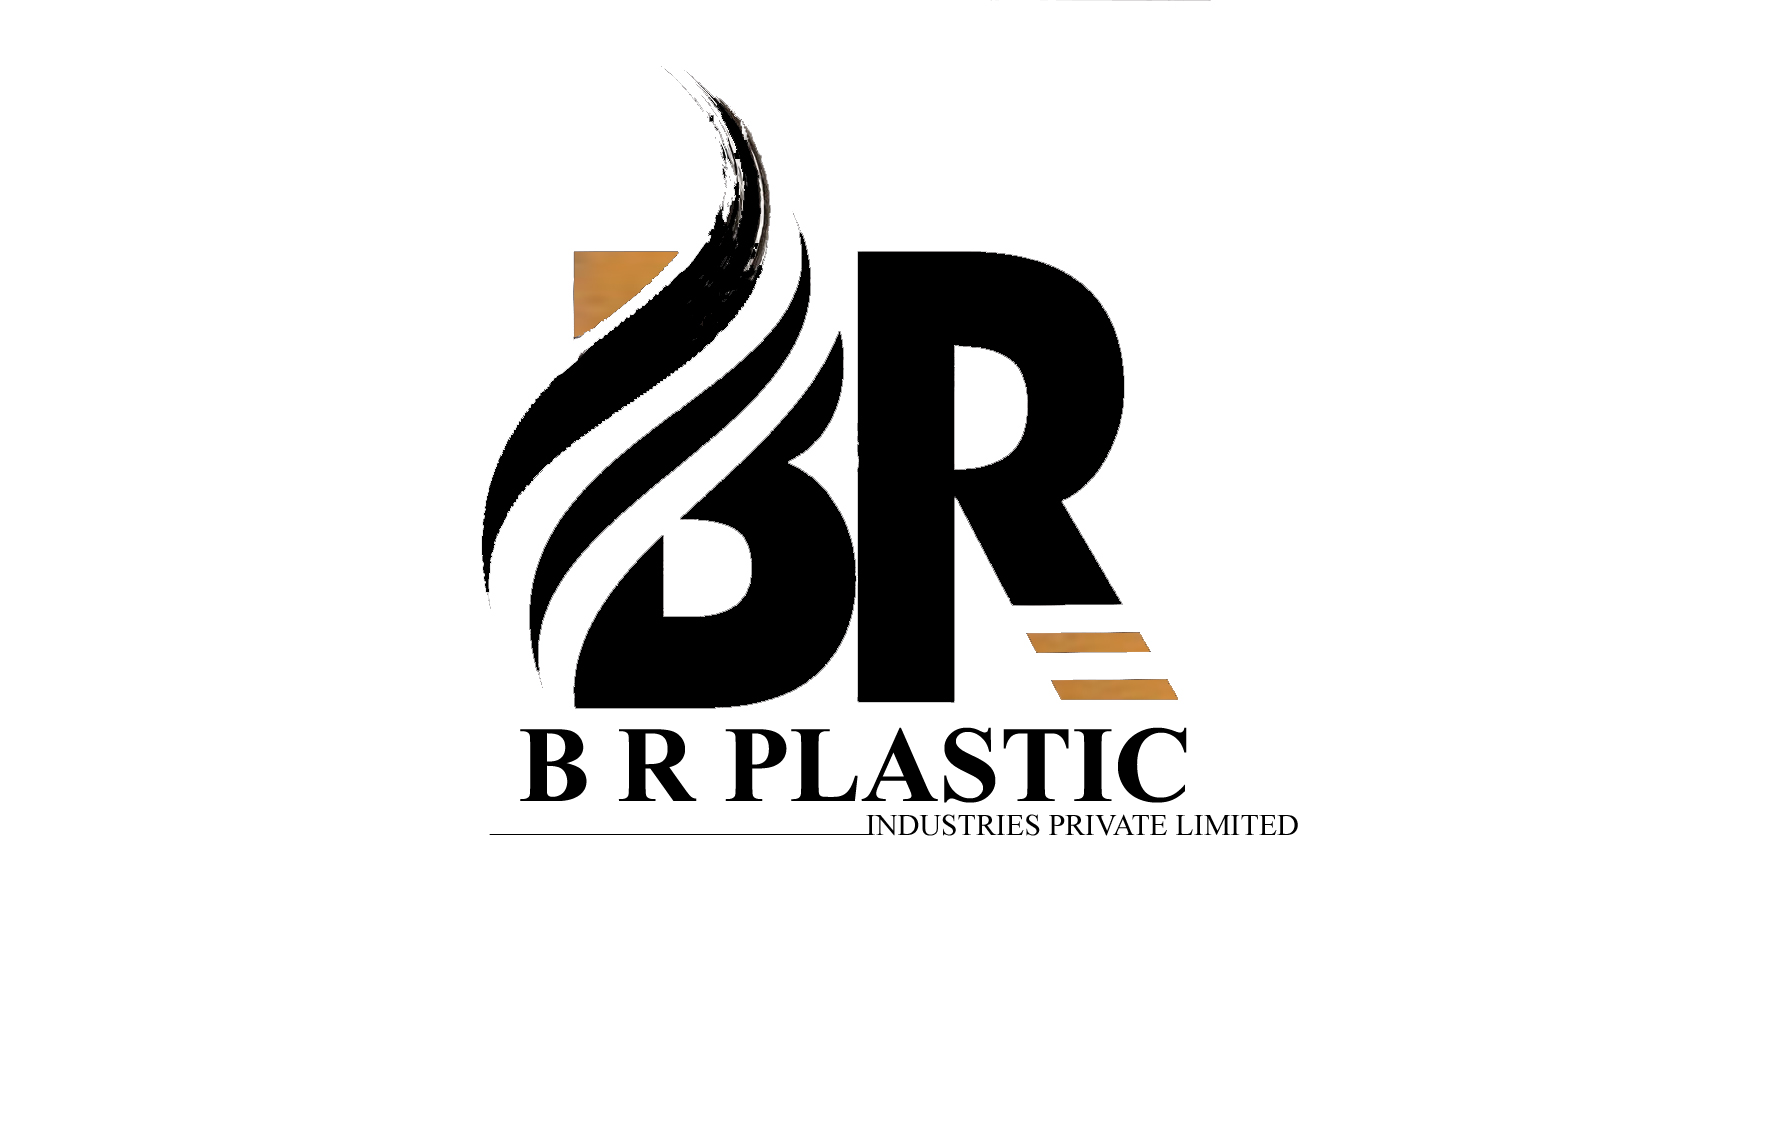 B R PLASTIC INDUSTRIES PRIVATE LIMITED